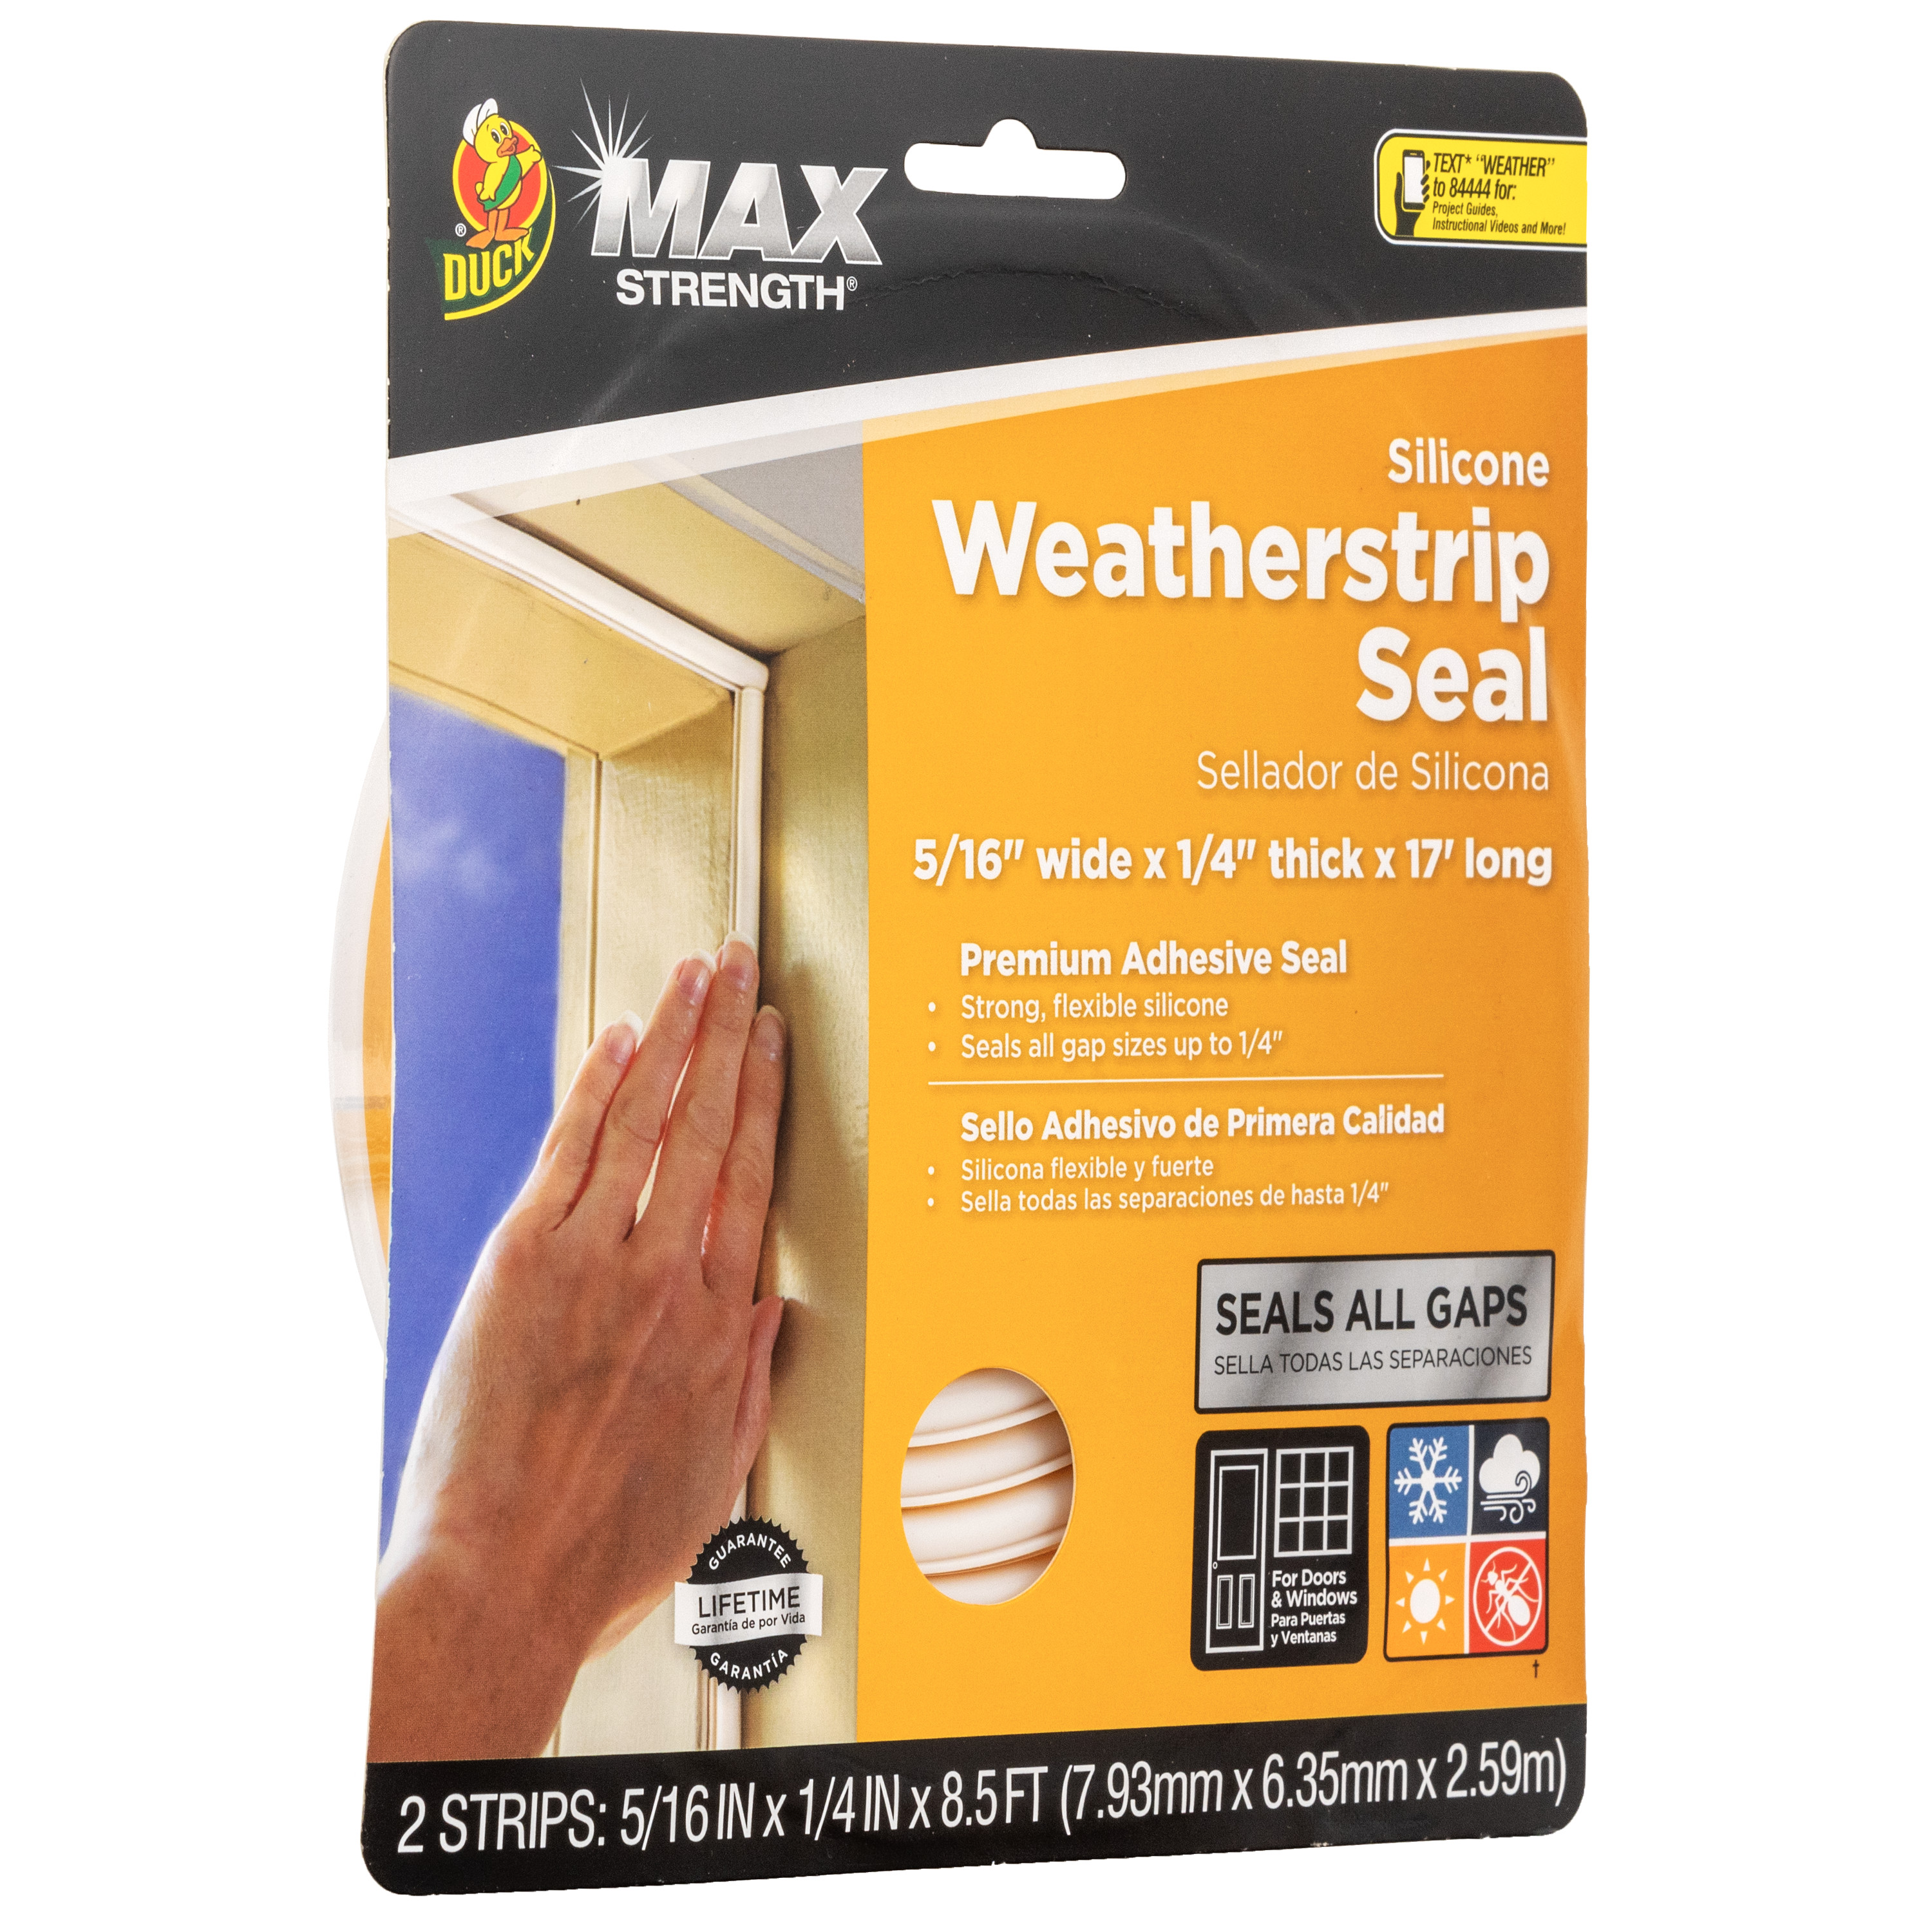 Duck Max Strength White Silicone 17 ft. Weatherstrip Seal - image 1 of 11